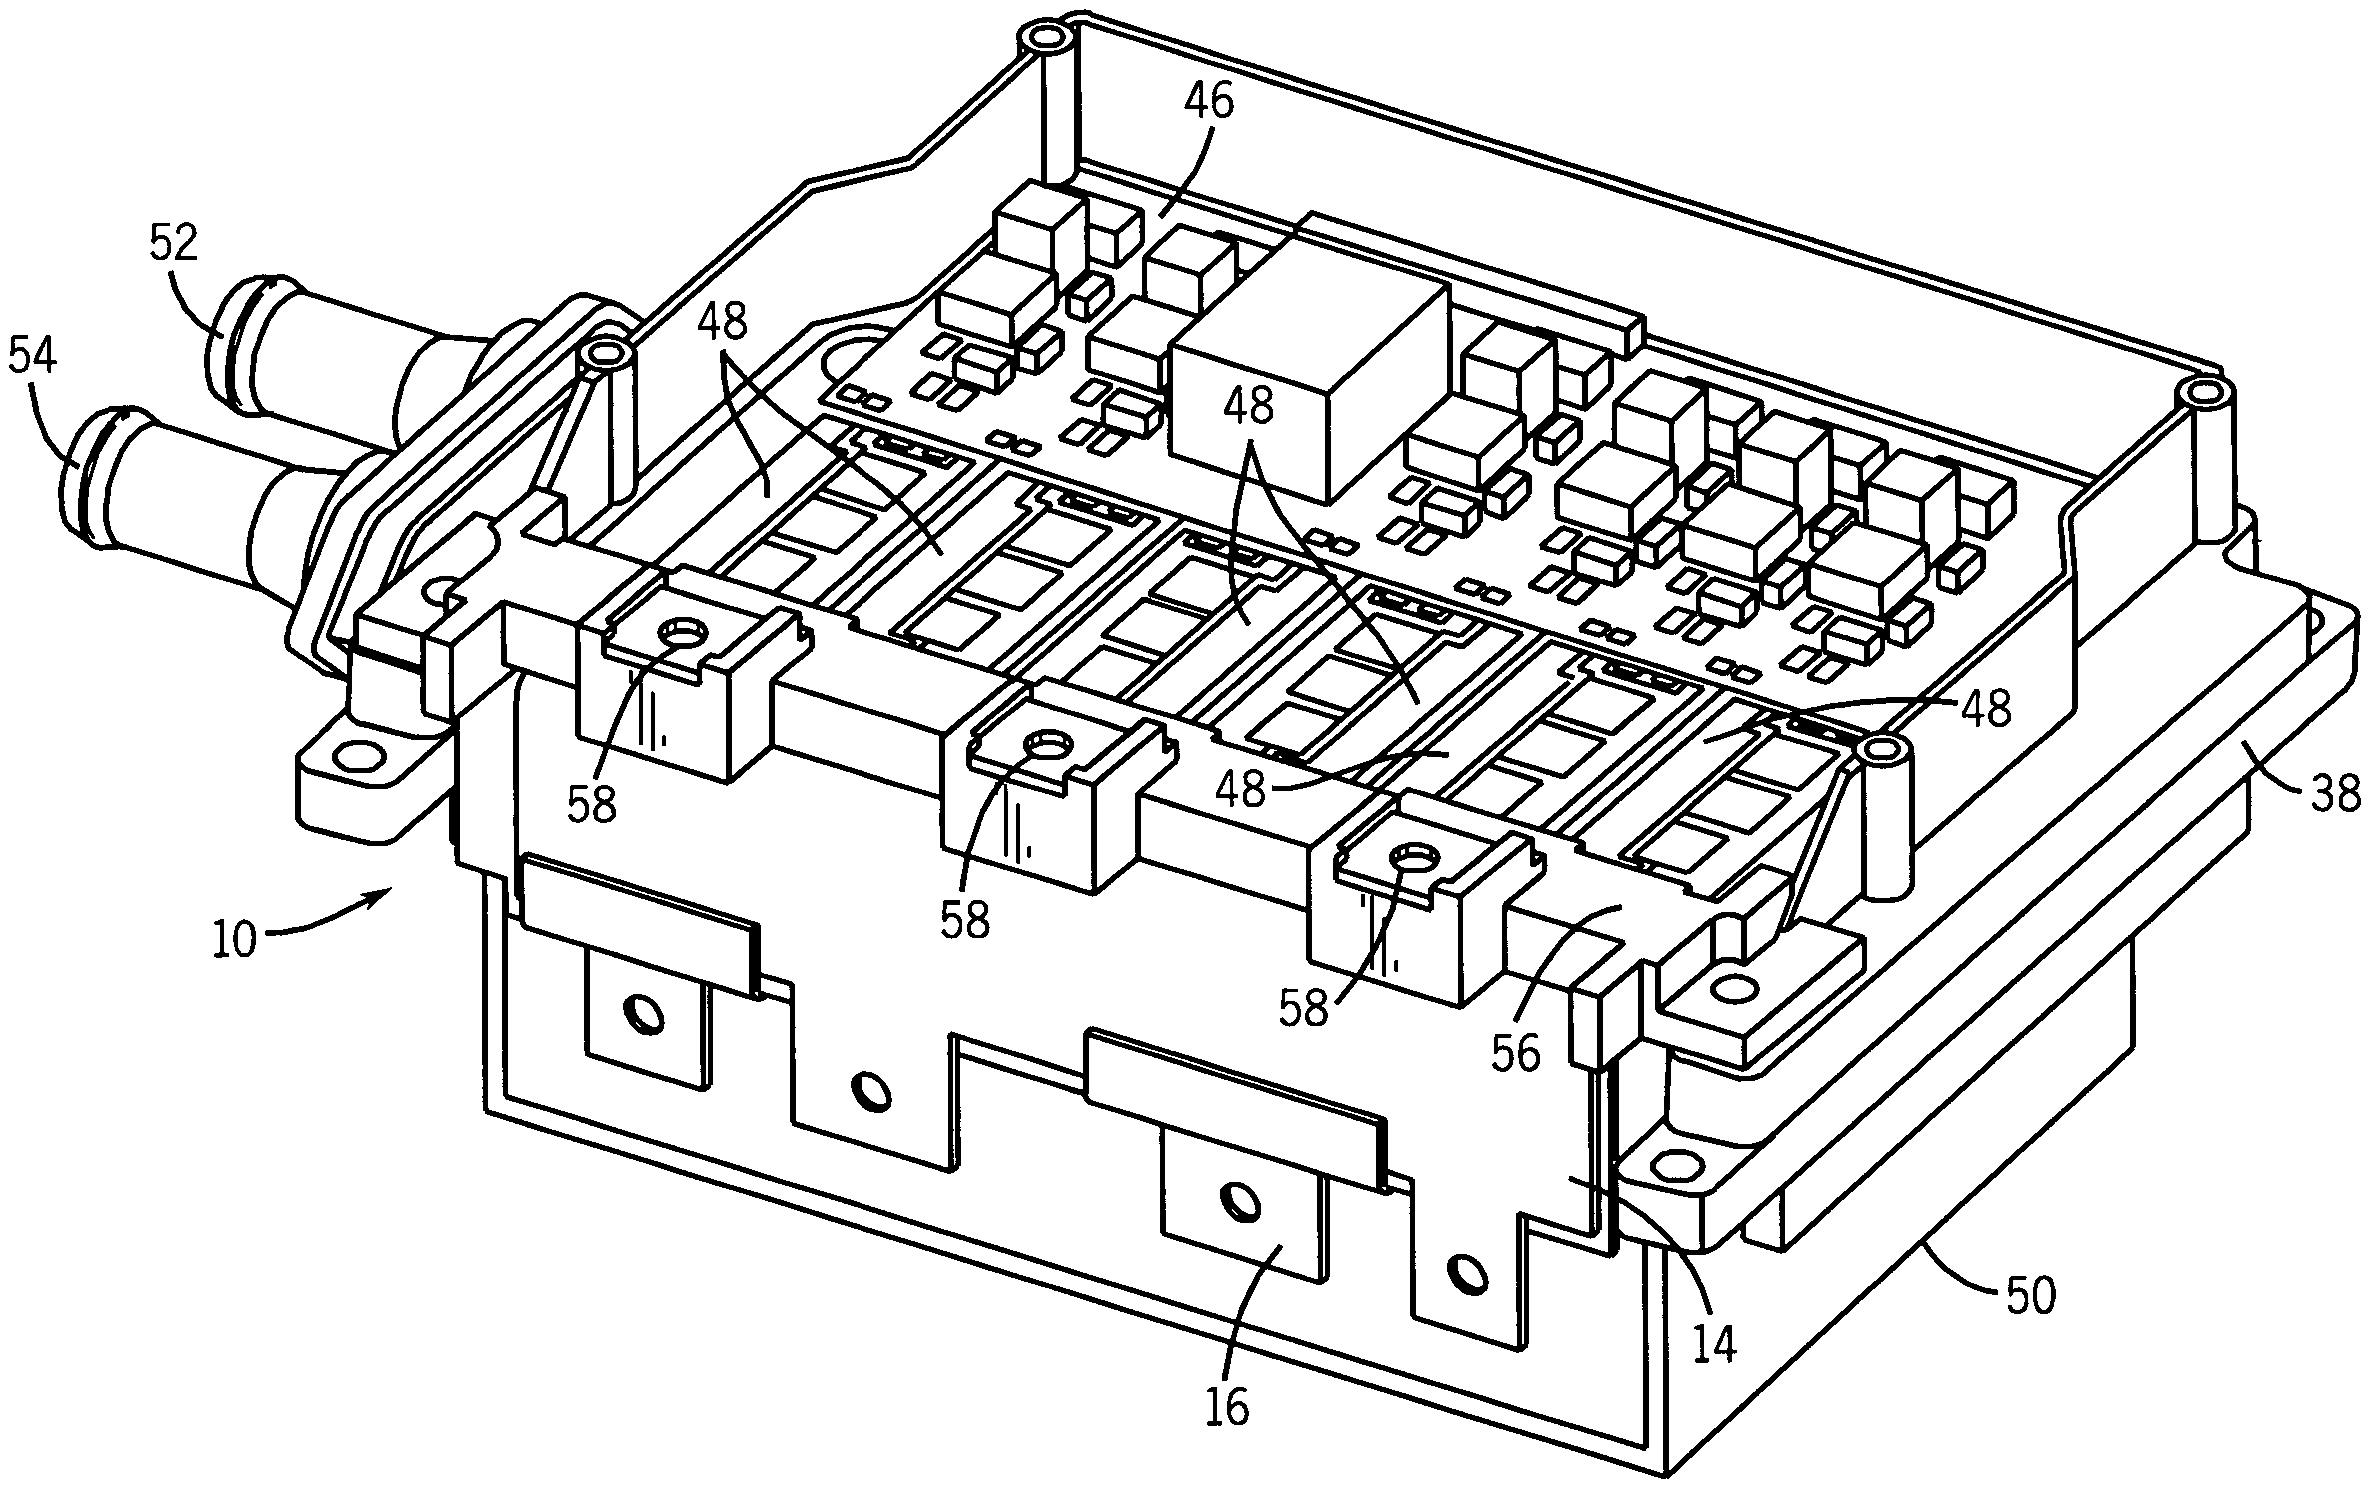 Bus structure for power switching circuits